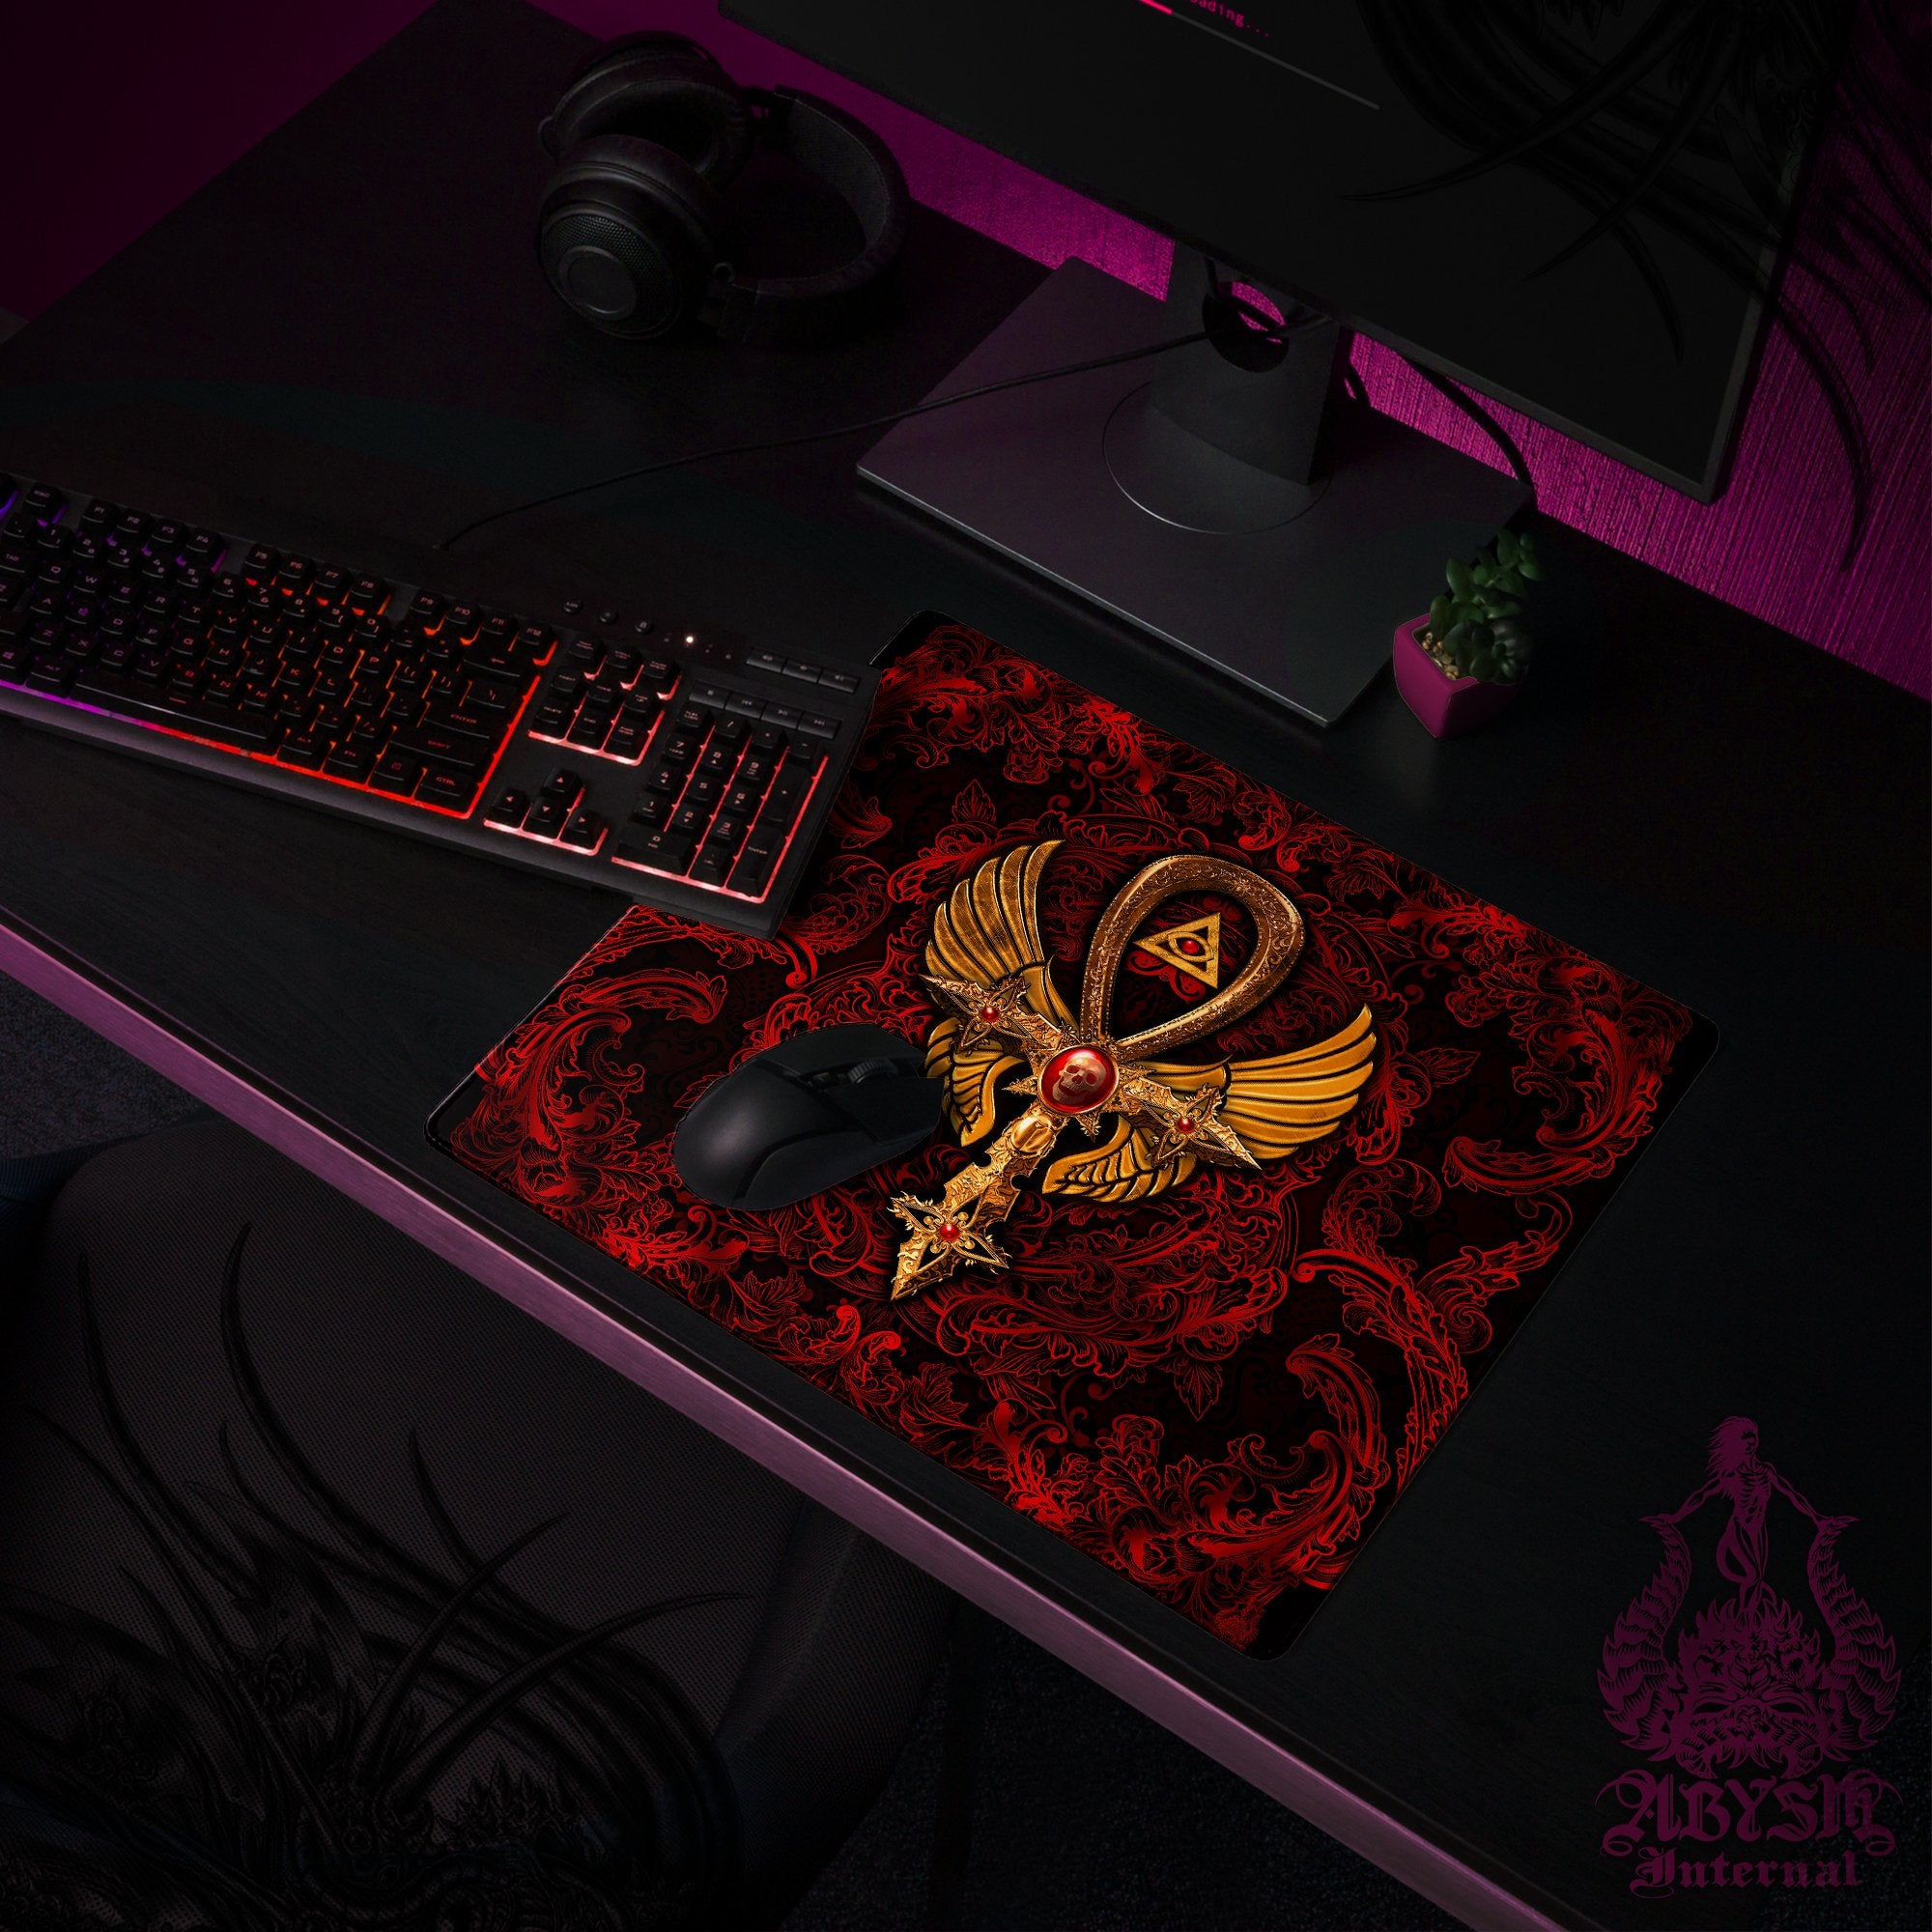 Bloody Goth Mouse Pad, Ankh Gaming Desk Mat, Red and Black Cross Table Protector Cover, Skull Workpad, Dark Art Print - 3 Colors - Abysm Internal